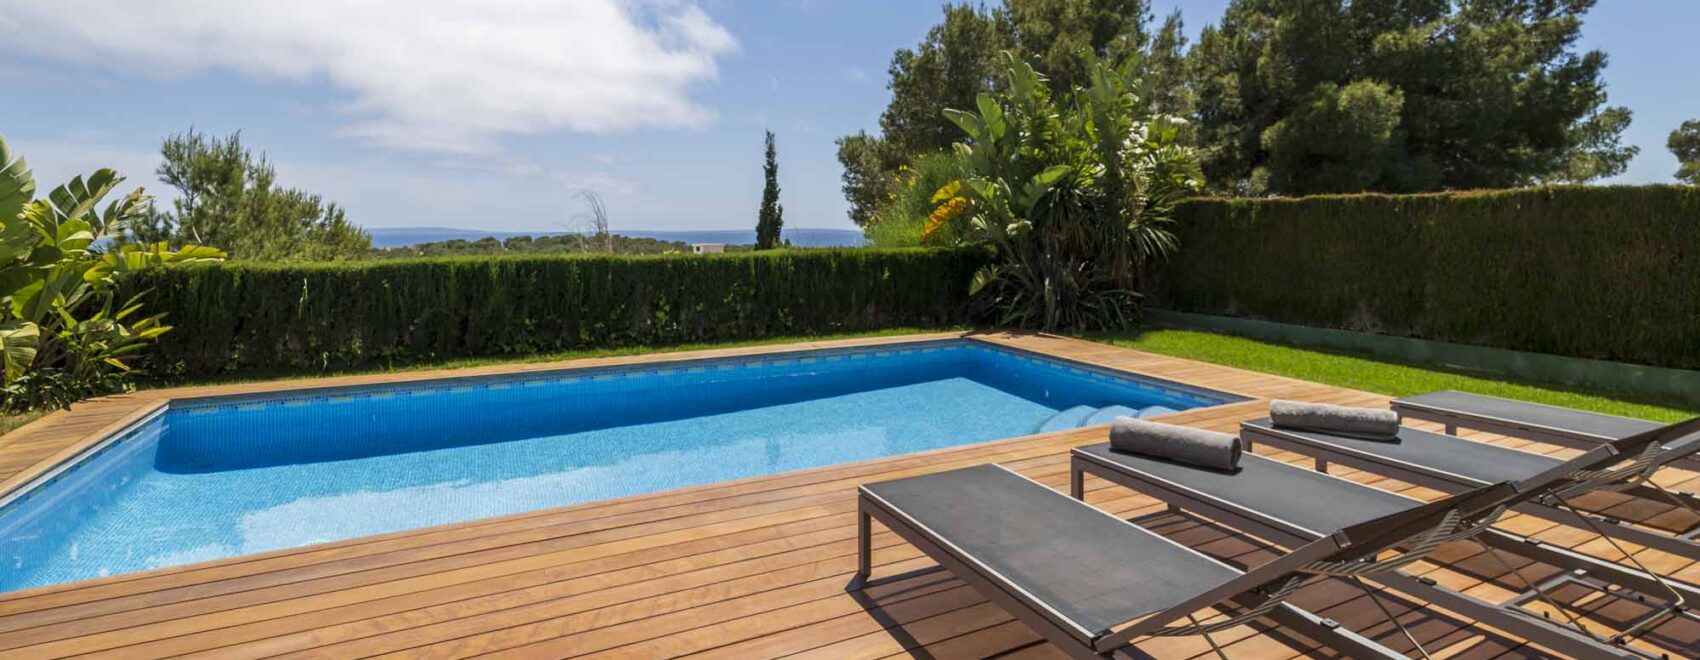 Luxurious private pool with crystal blue water, flanked by a spacious wooden deck and comfortable sun loungers, with lush greenery and a view of the sea horizon in the background.